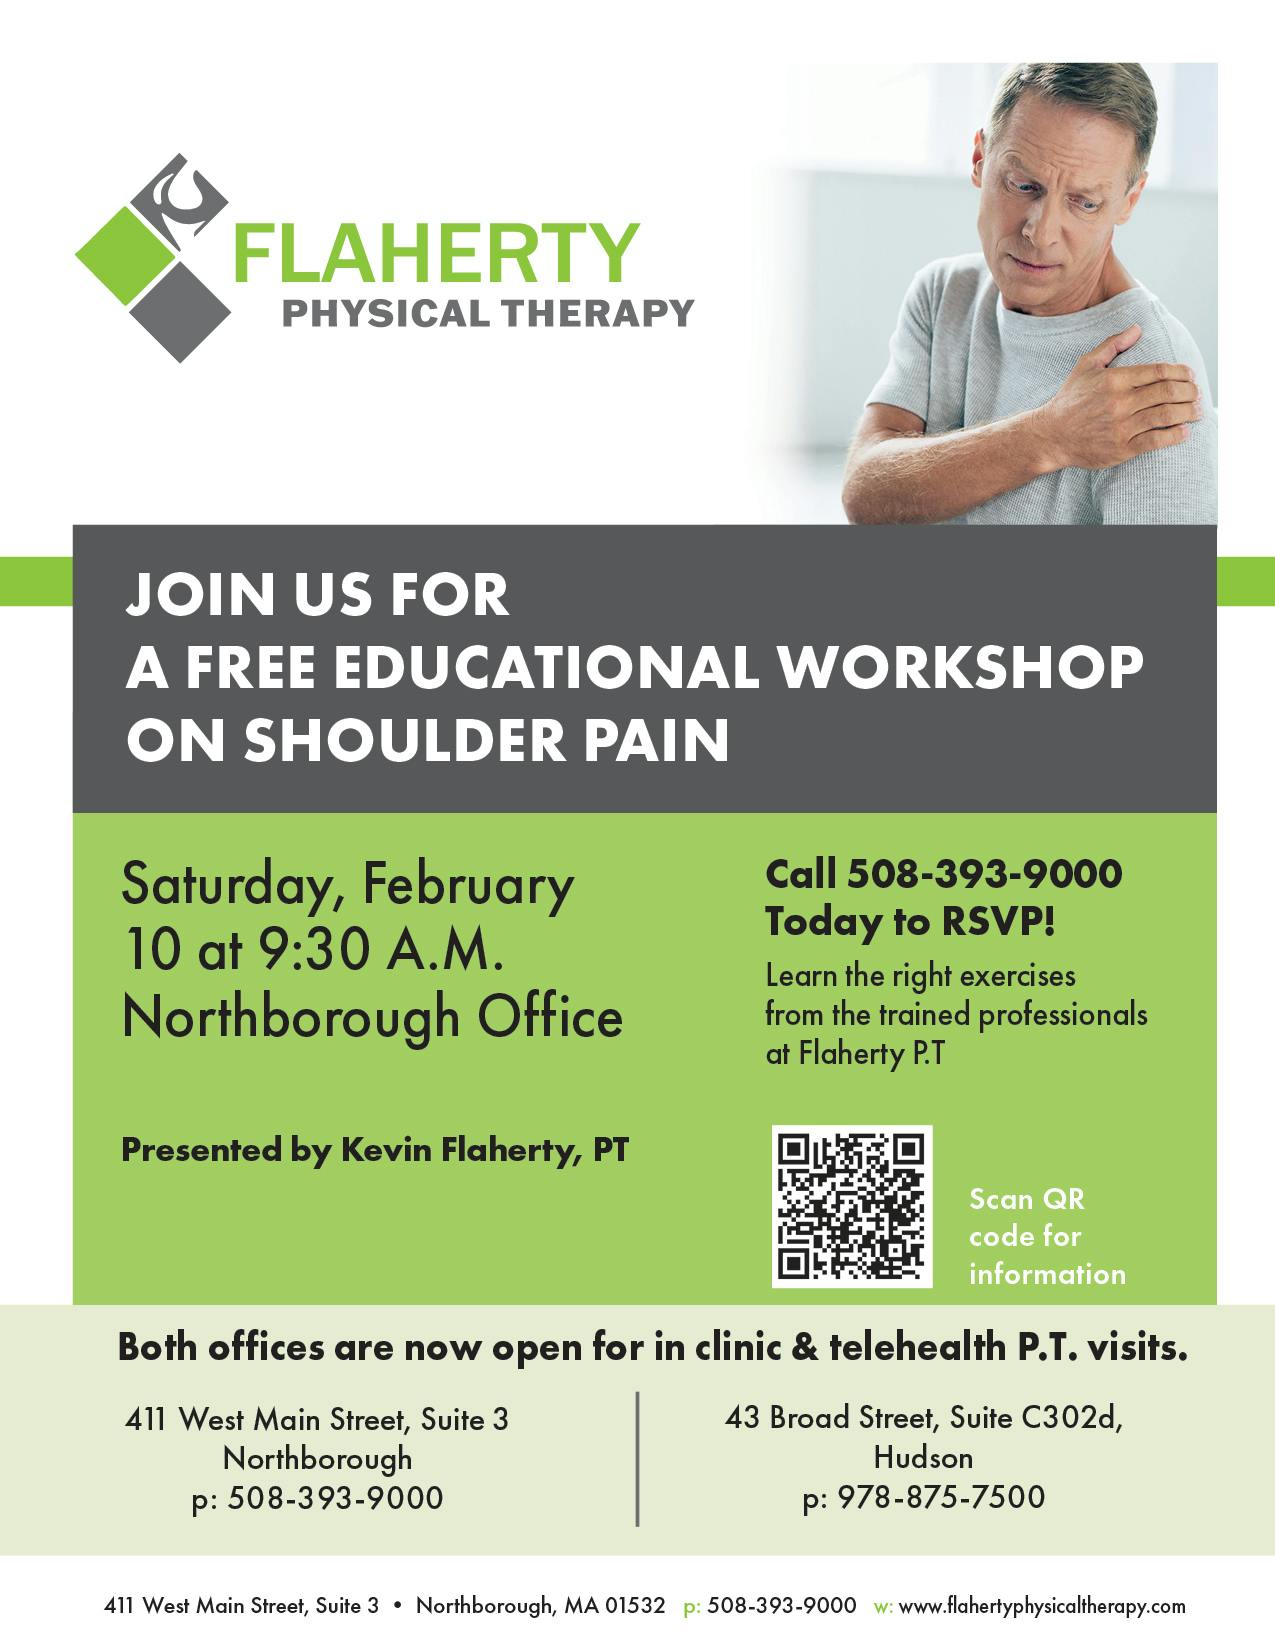 Join Us for a Free Educational Workshop on Shoulder Pain | TSaturday, February 10th at 9:30 a.m.